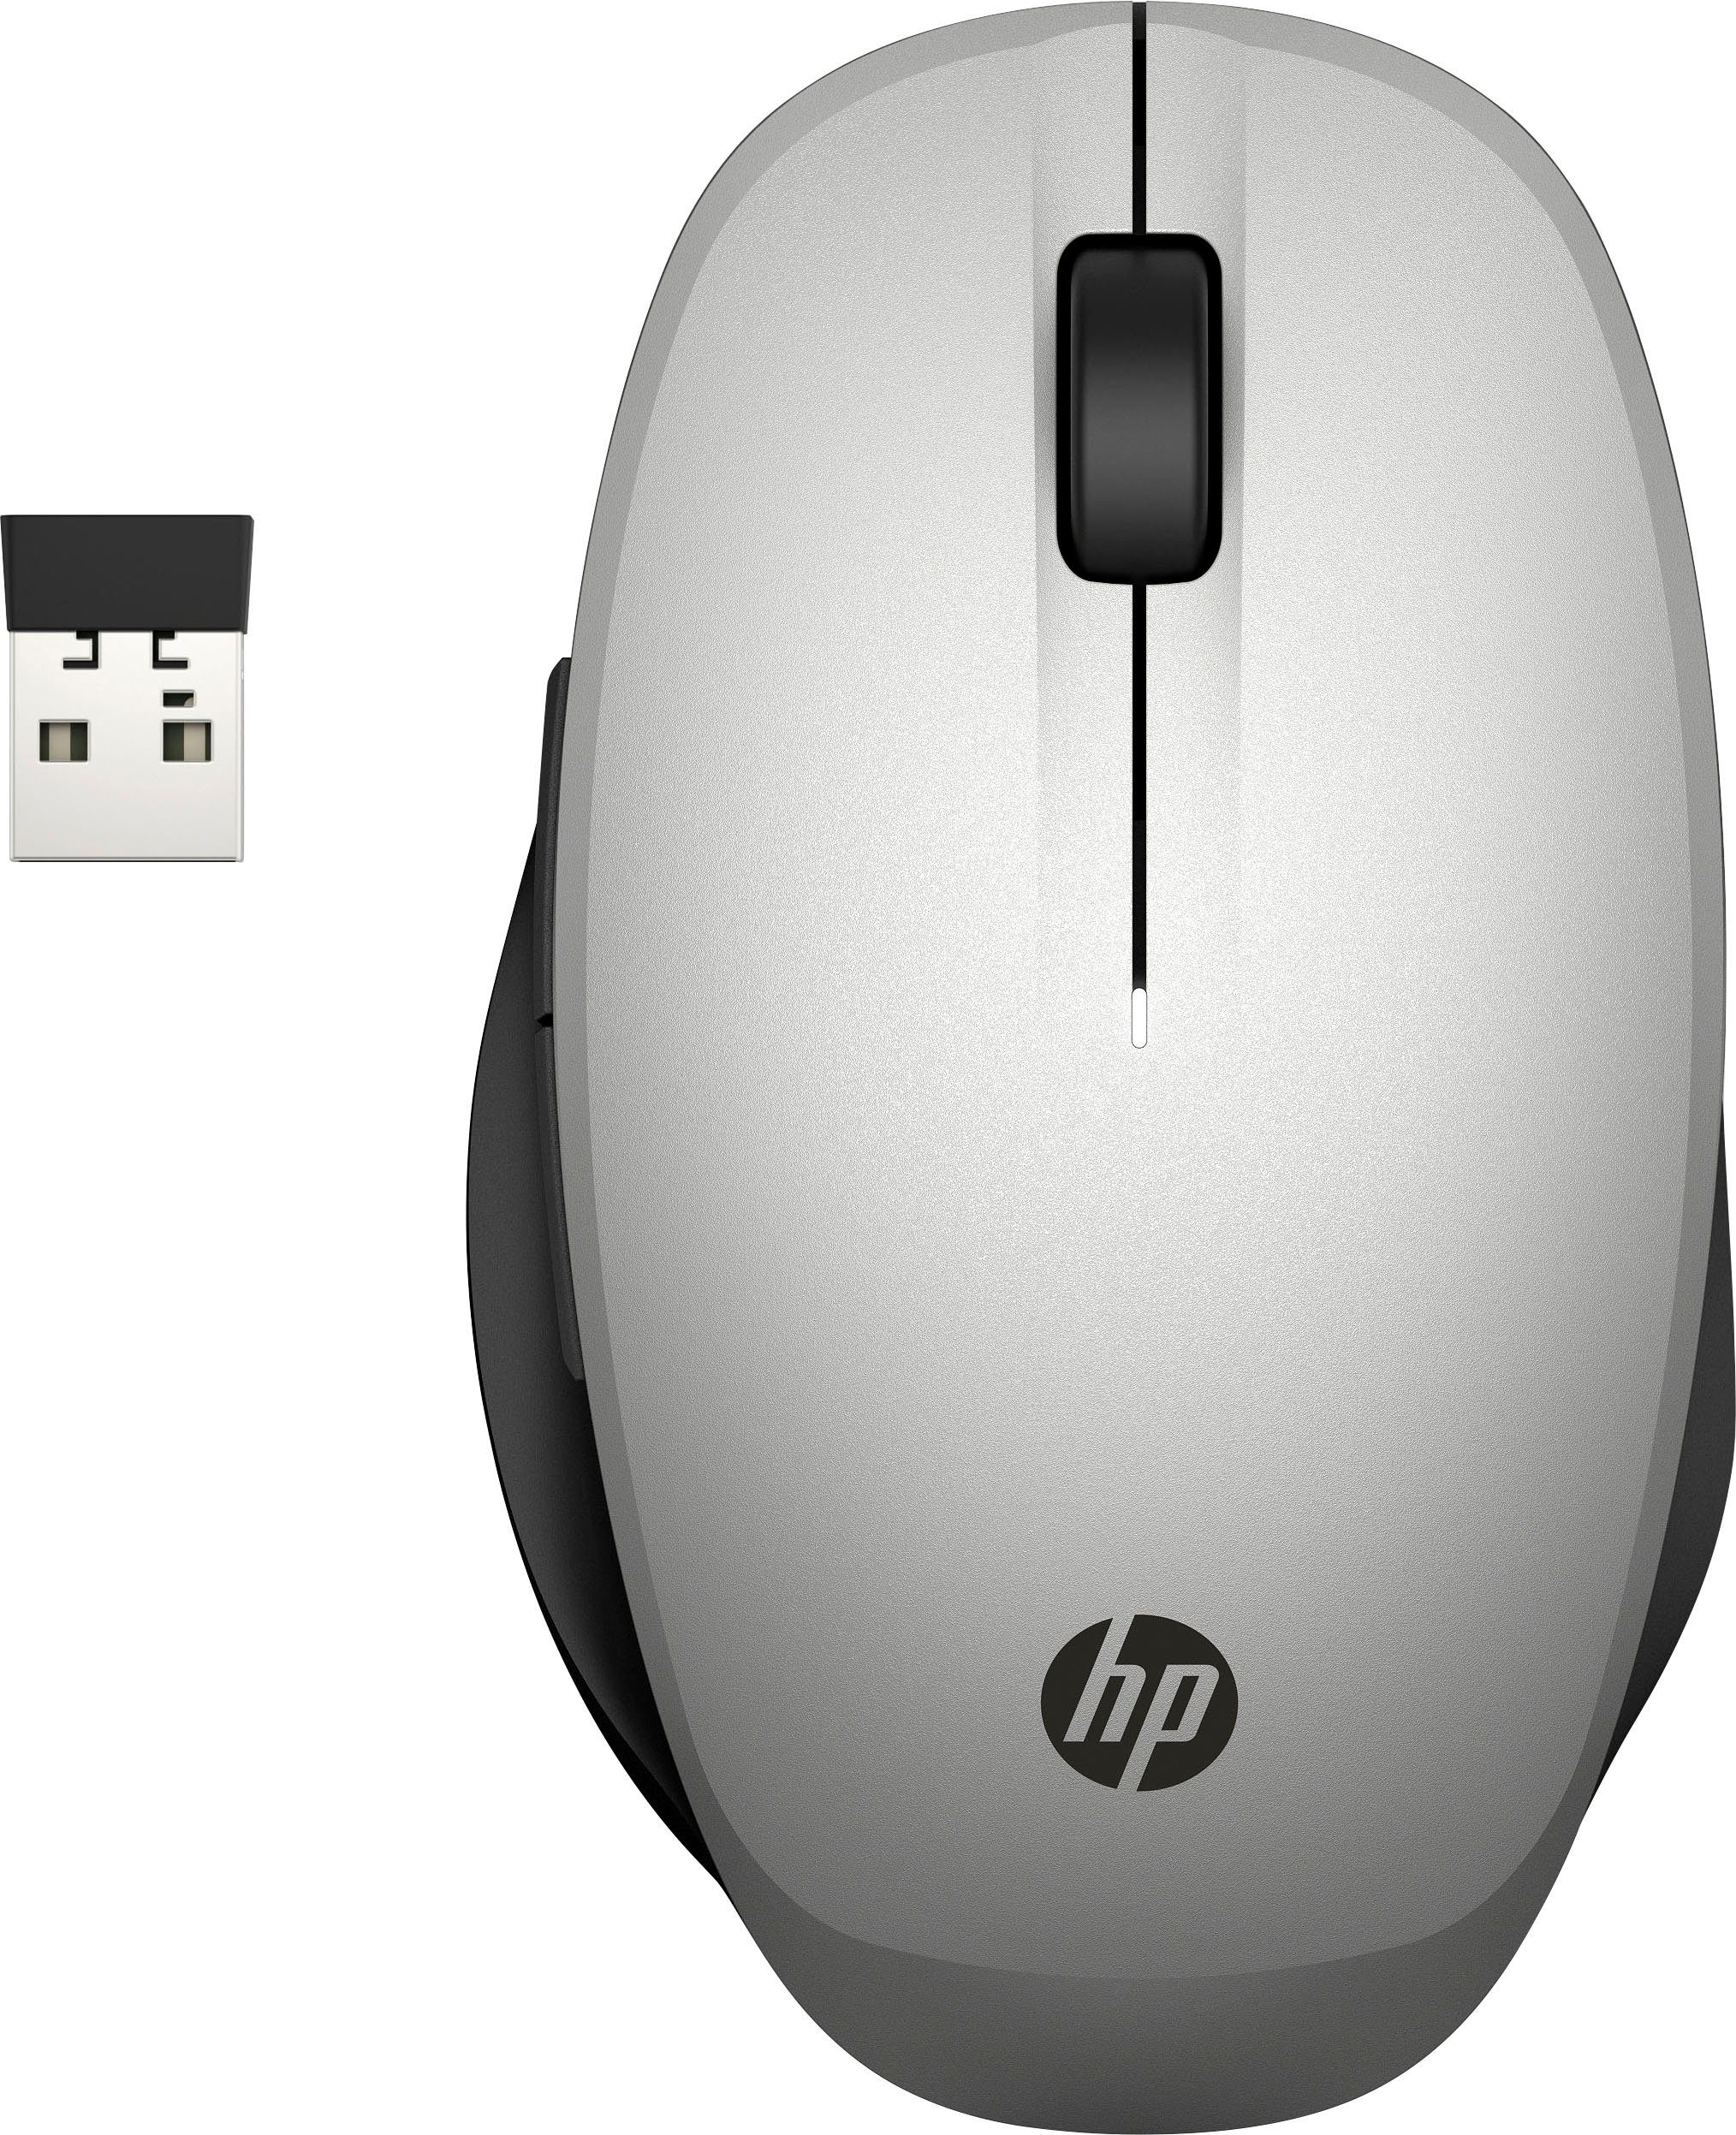 HP Dual Mode Mouse 300 (Bluetooth) Maus